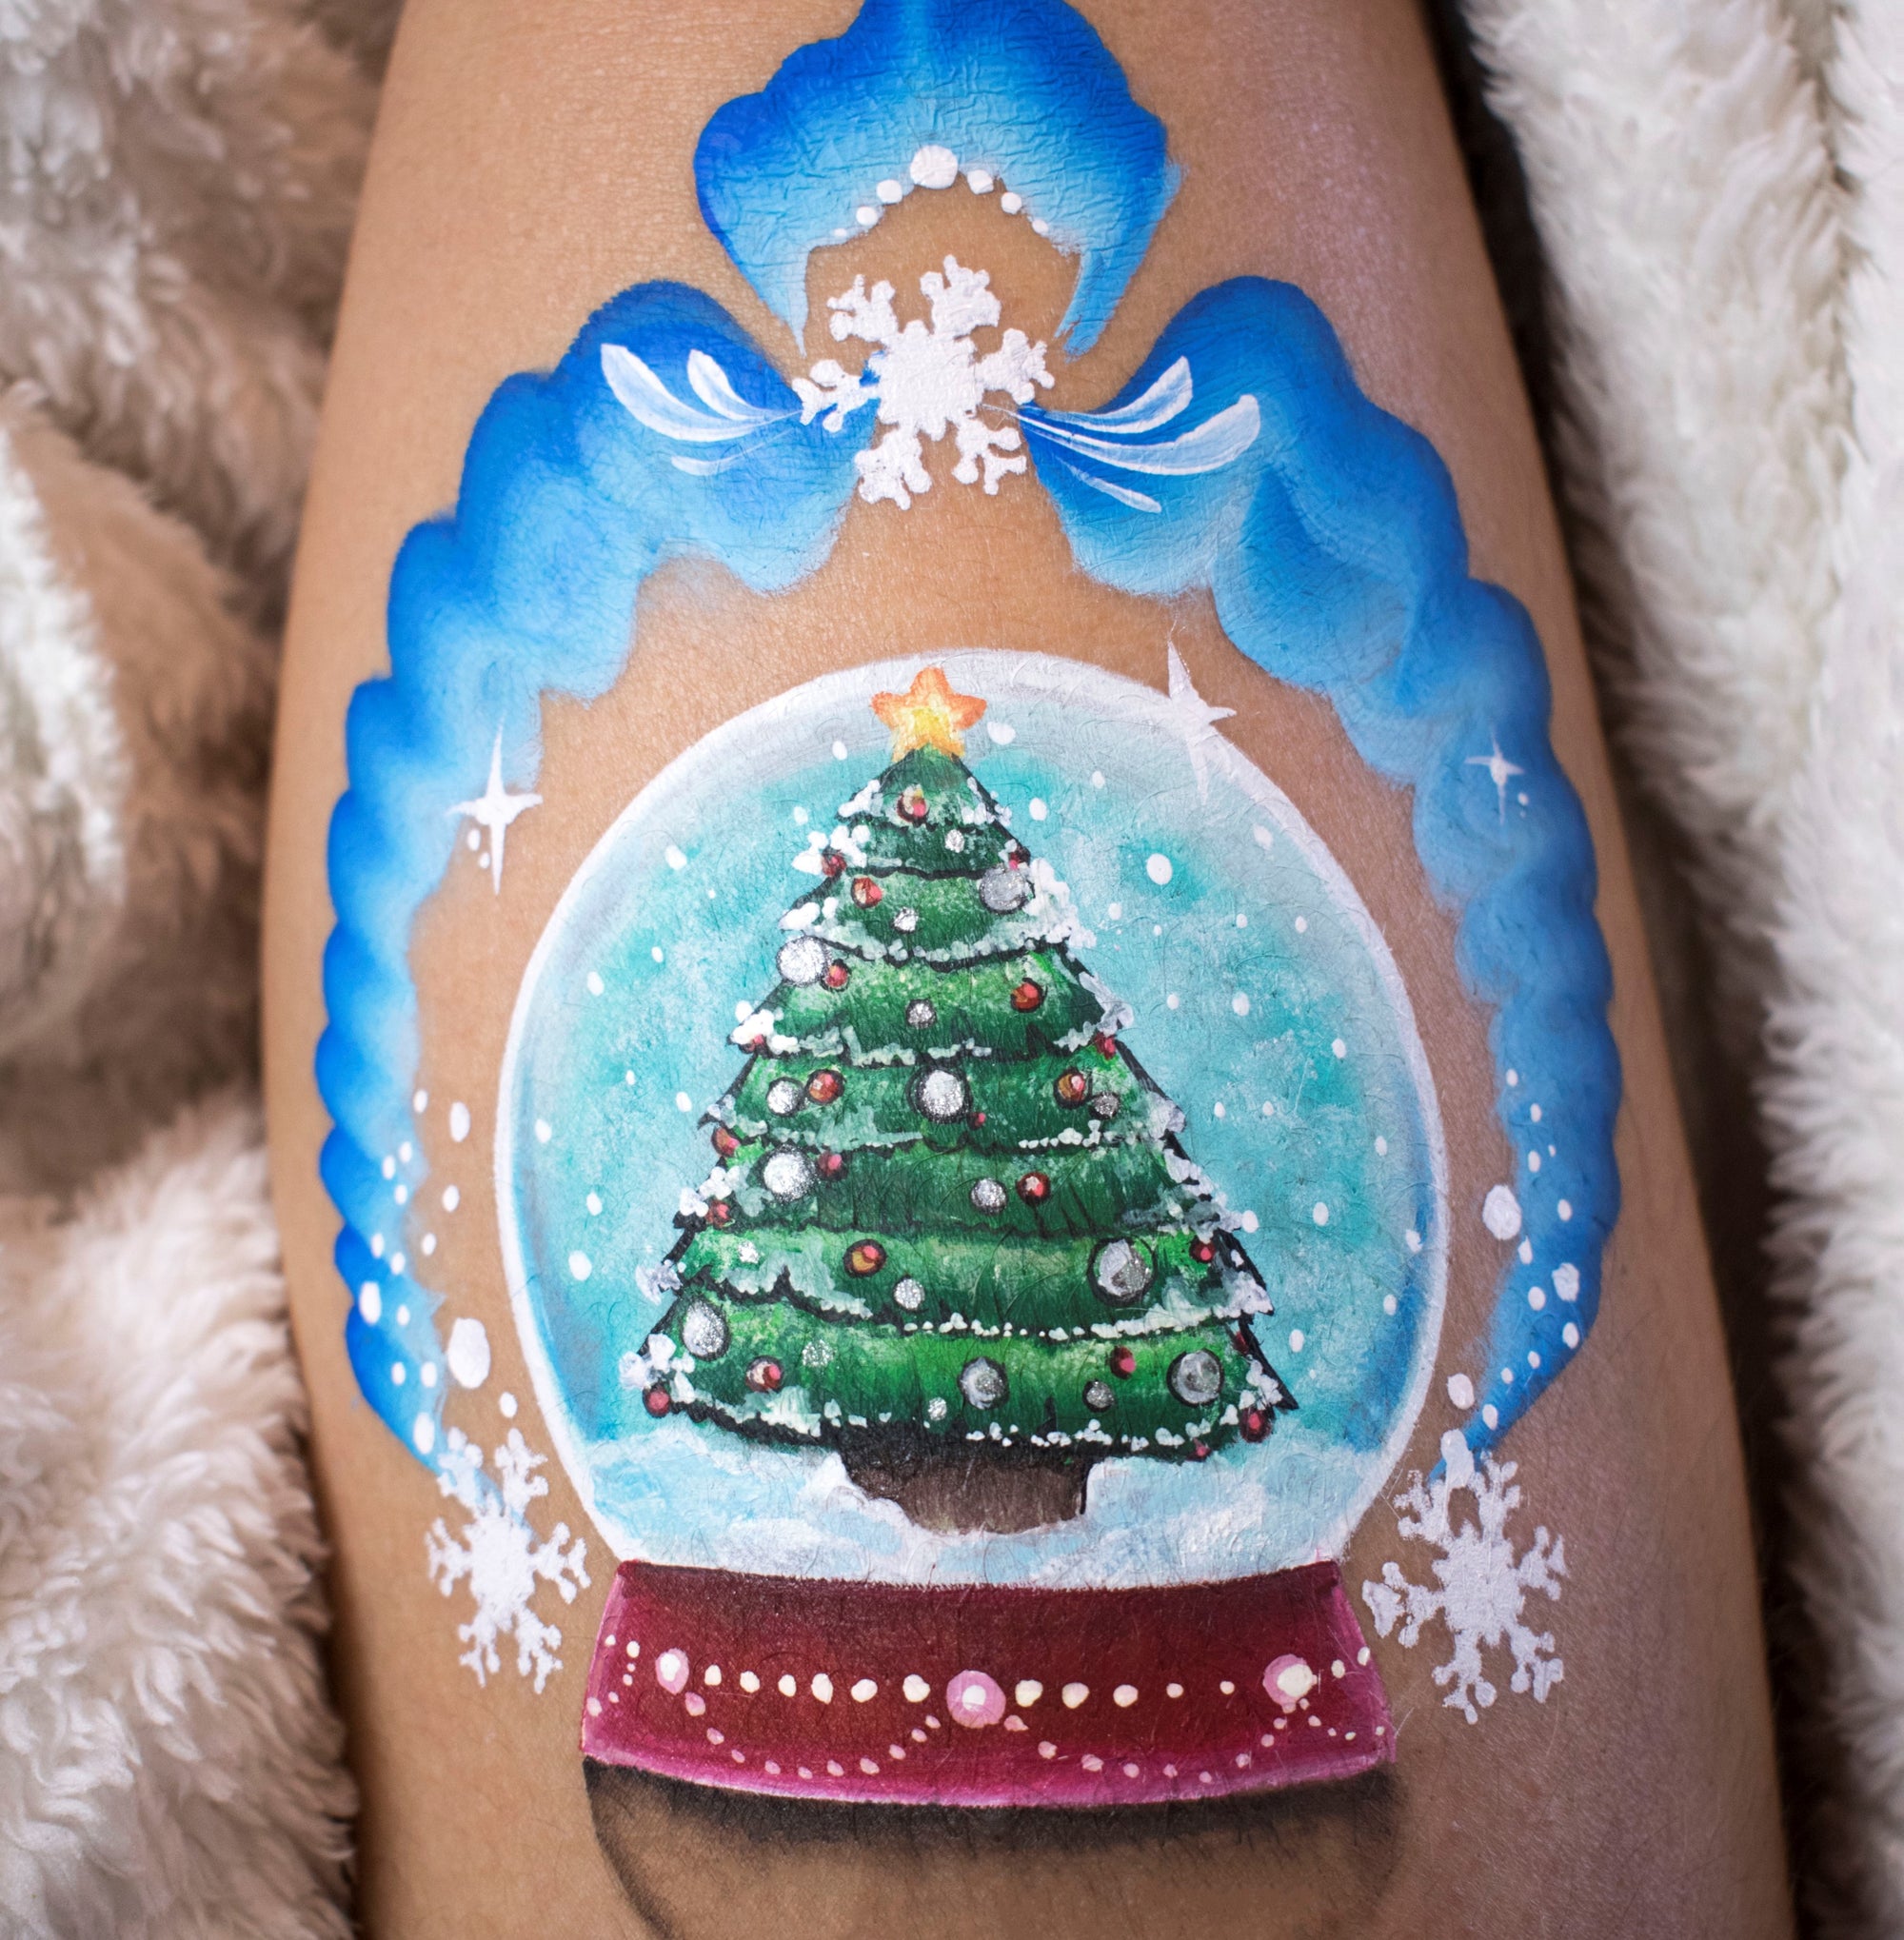 How to Face Paint a Christmas Snowglobe